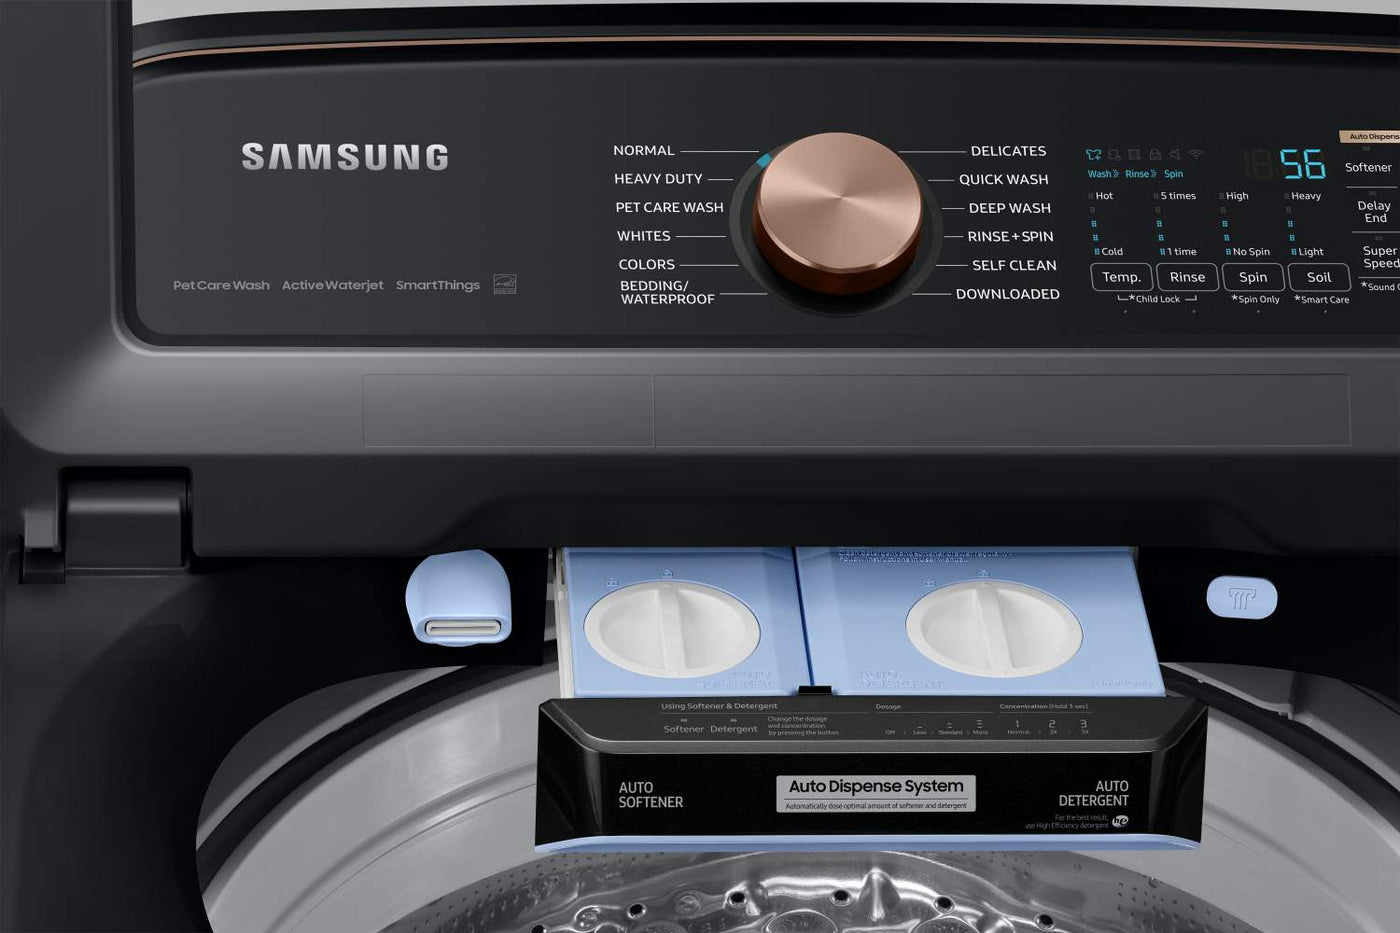 Samsung Black Stainless Ultra Capacity Top Load Washer (6.2cu.ft) & Smart Electric Dryer with Pet Care (7.4cu.ft) - WA54CG7550AVA4/DVE54CG7550VAC